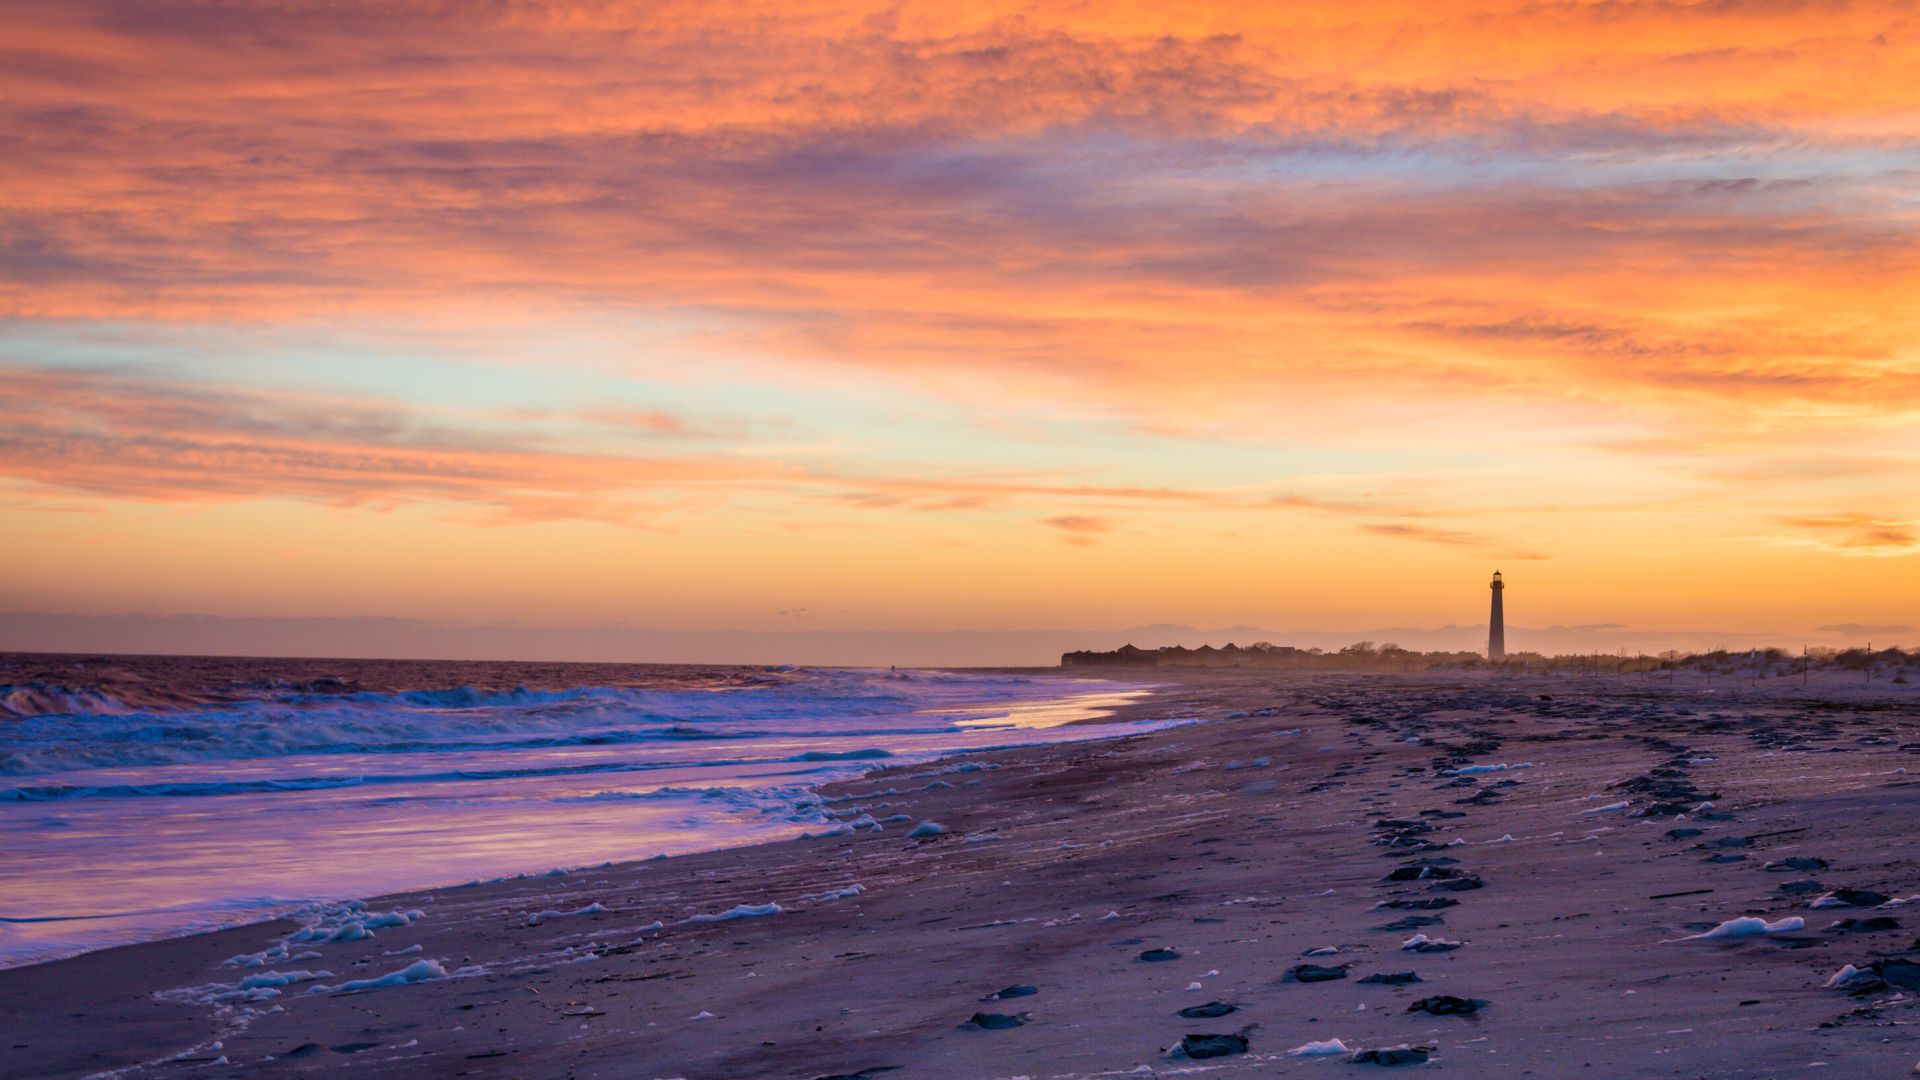 Cape May beach at sunset with lighthouse in background